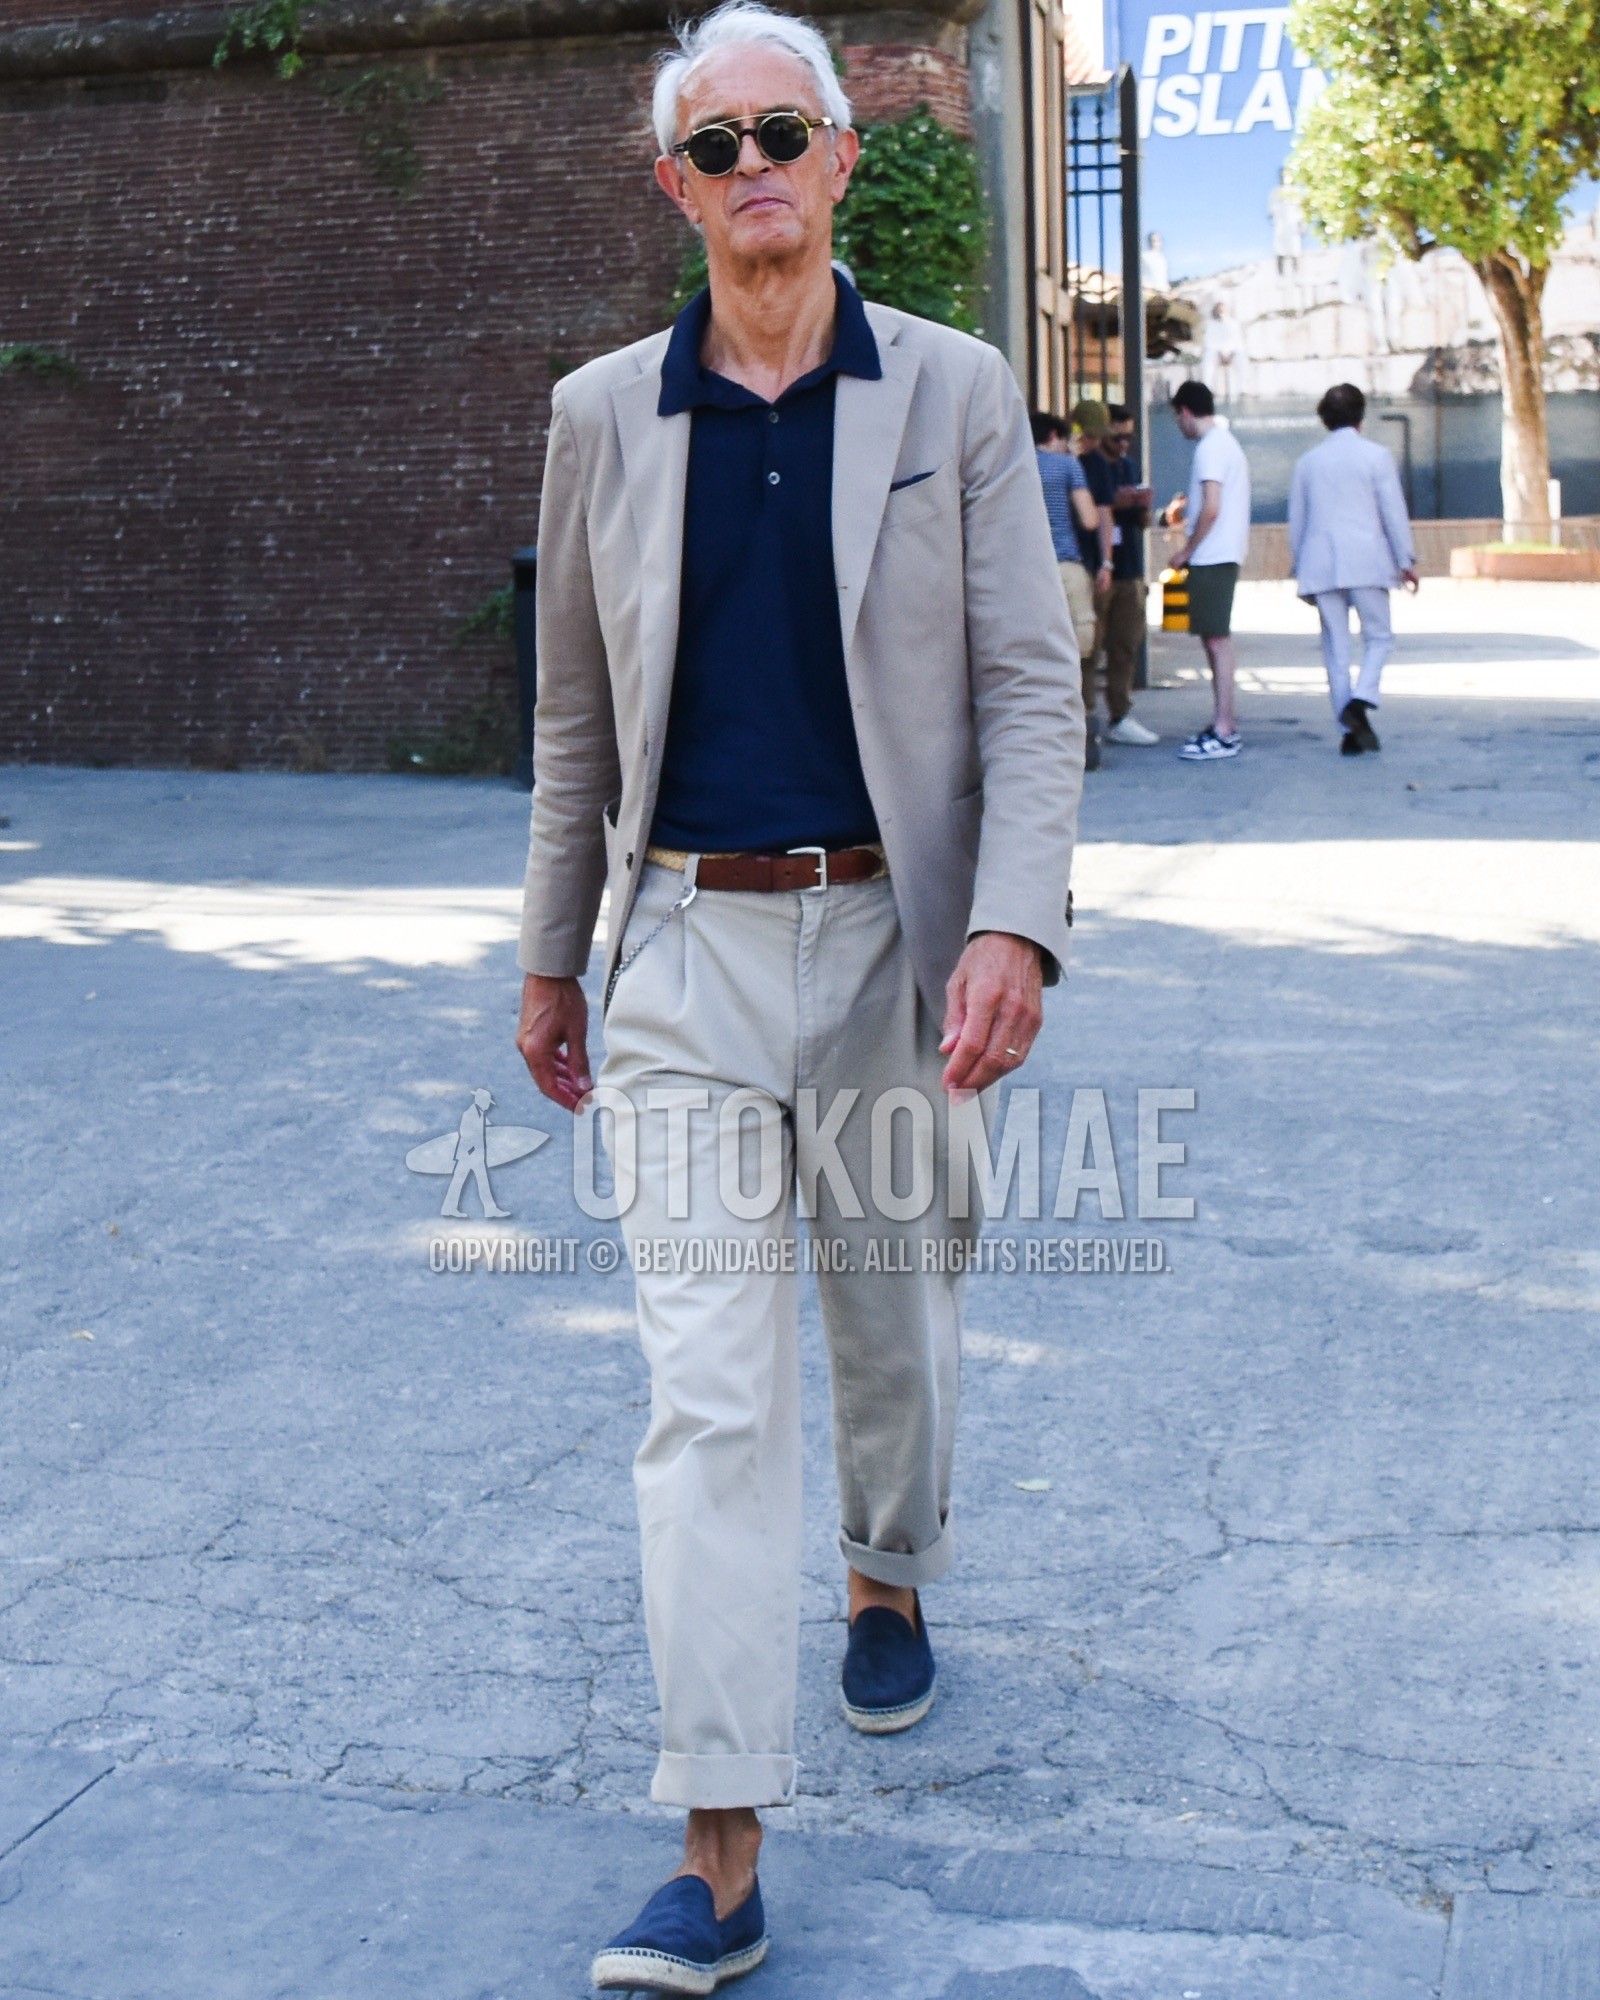 Men's spring summer outfit with gold plain sunglasses, navy plain polo shirt, brown plain leather belt, navy slip-on sneakers, gray plain suit.